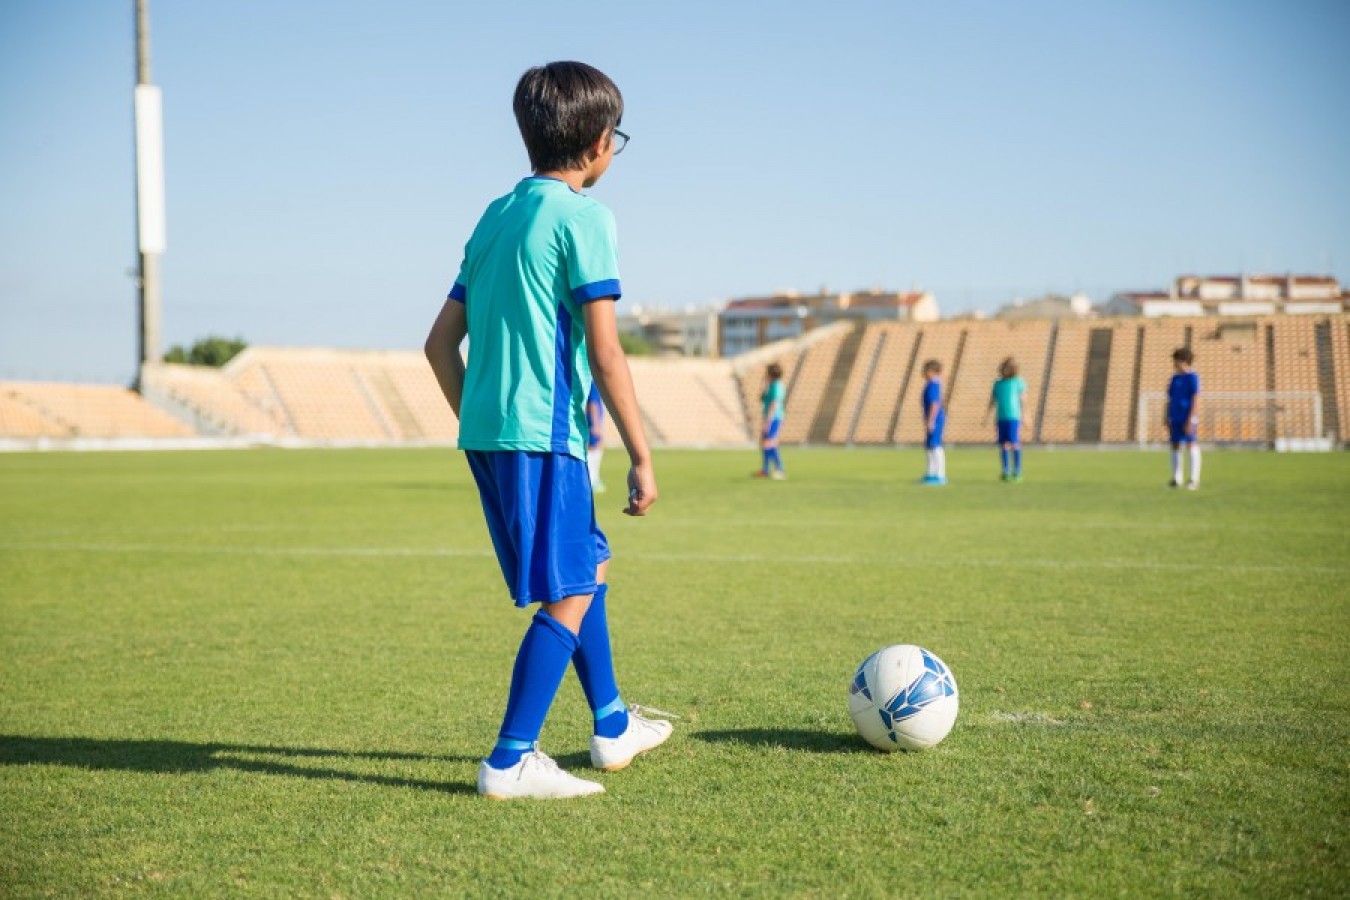 Developing Life Skills Through Sports and Its Benefits